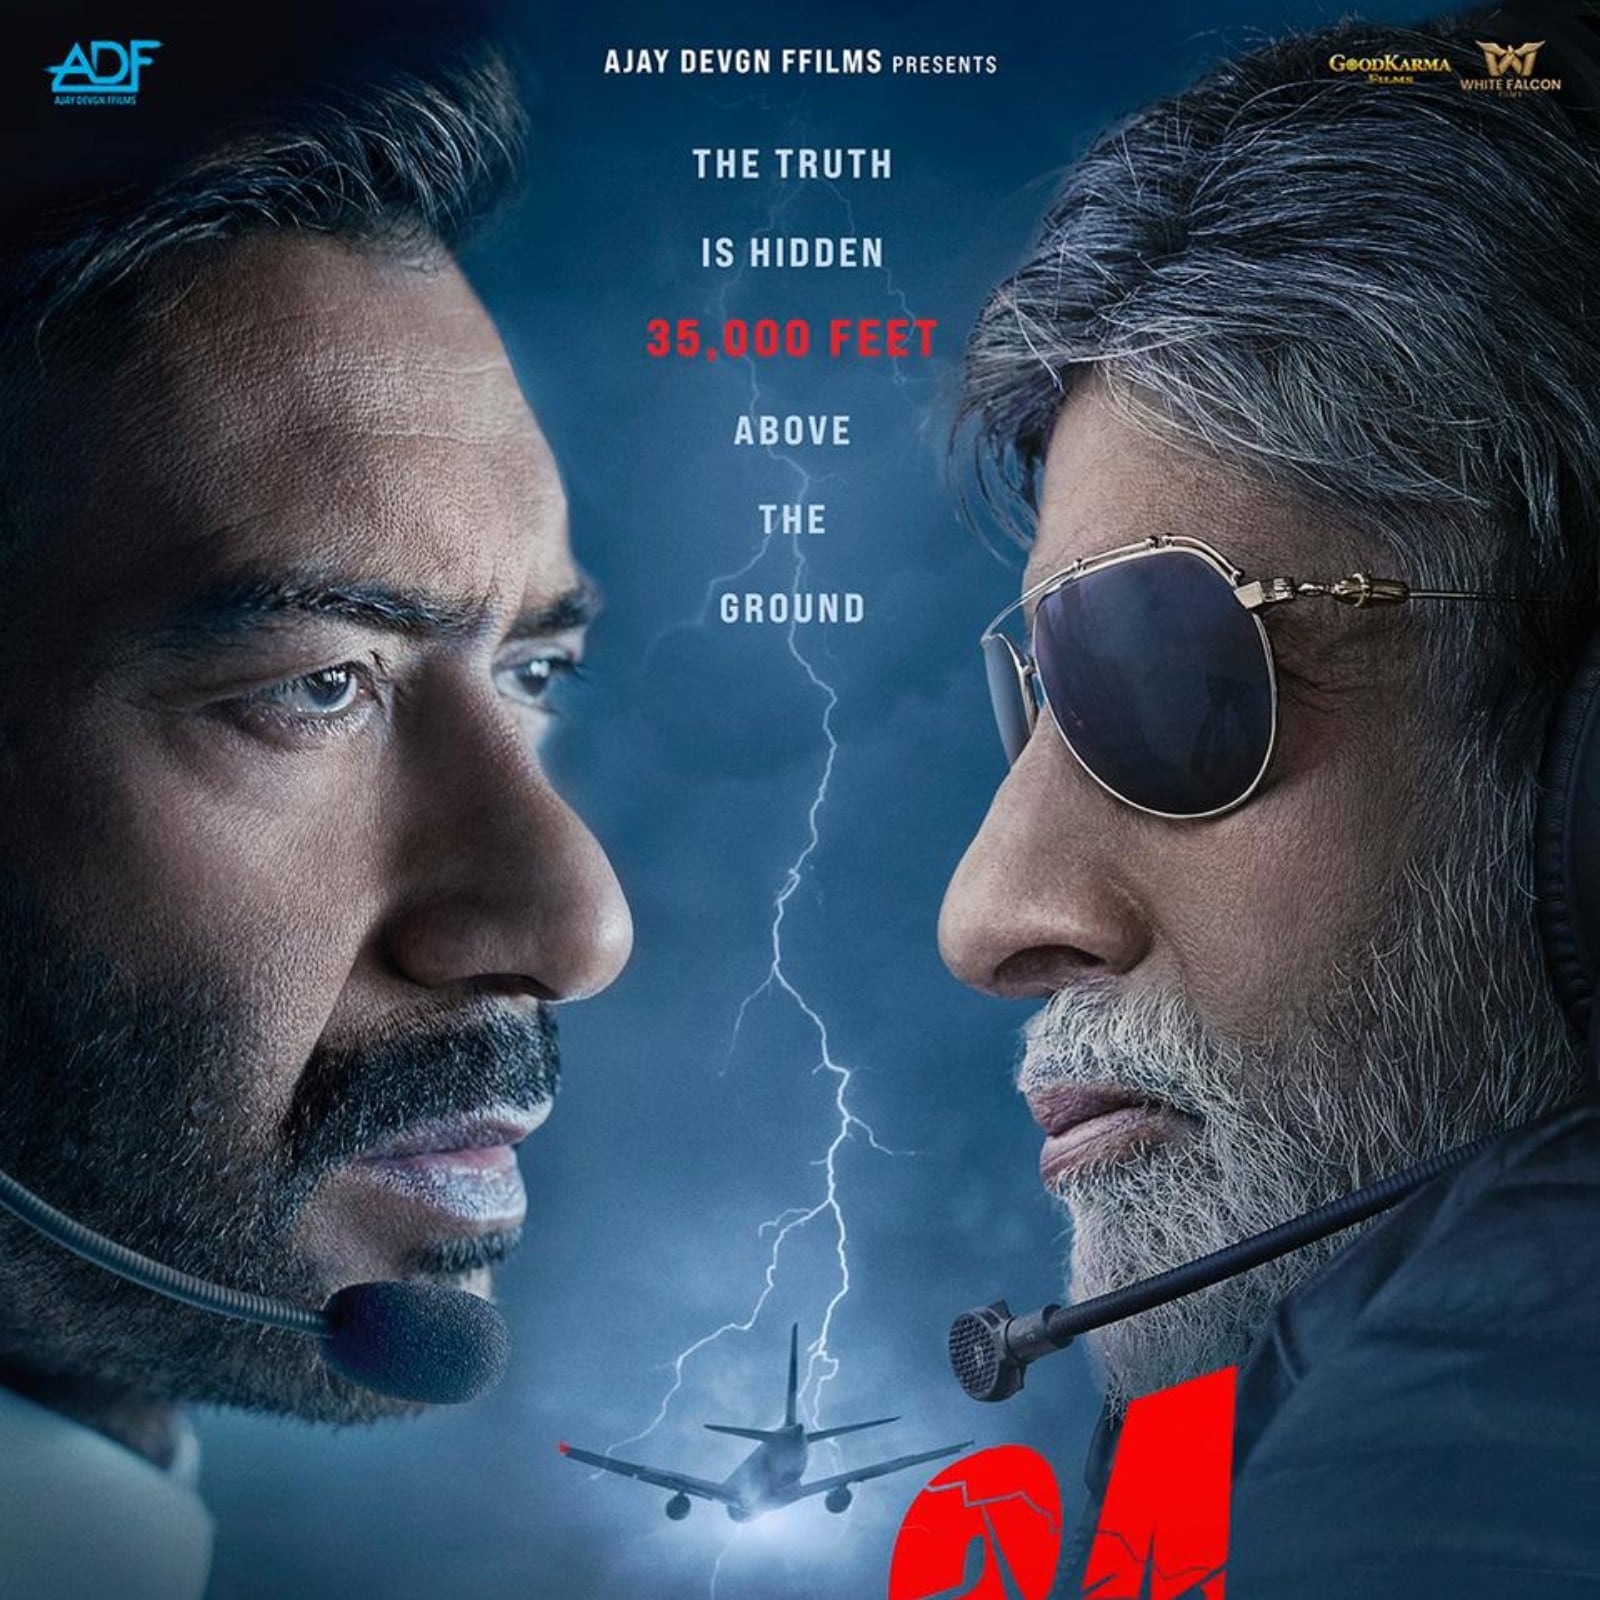 Runway 34 First Review: Amitabh Bachchan and Ajay Devgn's 'Terrific' Avatar  Steal The Show